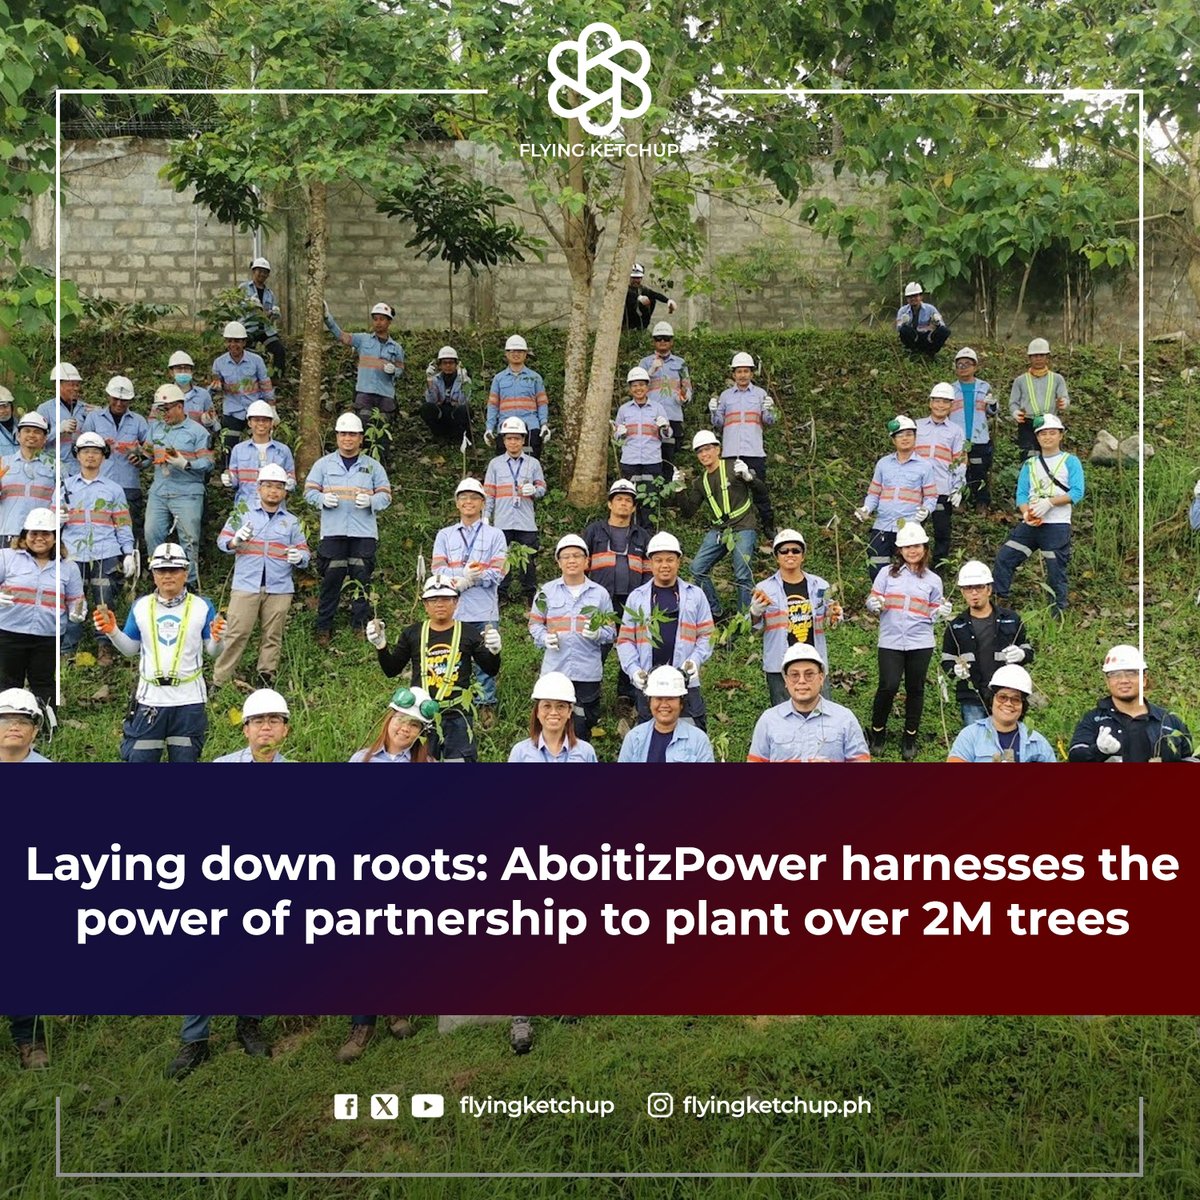 Laying down roots: AboitizPower harnesses the power of partnership to plant over 2M trees!

READ MORE: tinyurl.com/2b6jjalz

#FlyingKetchup #GoingGreen